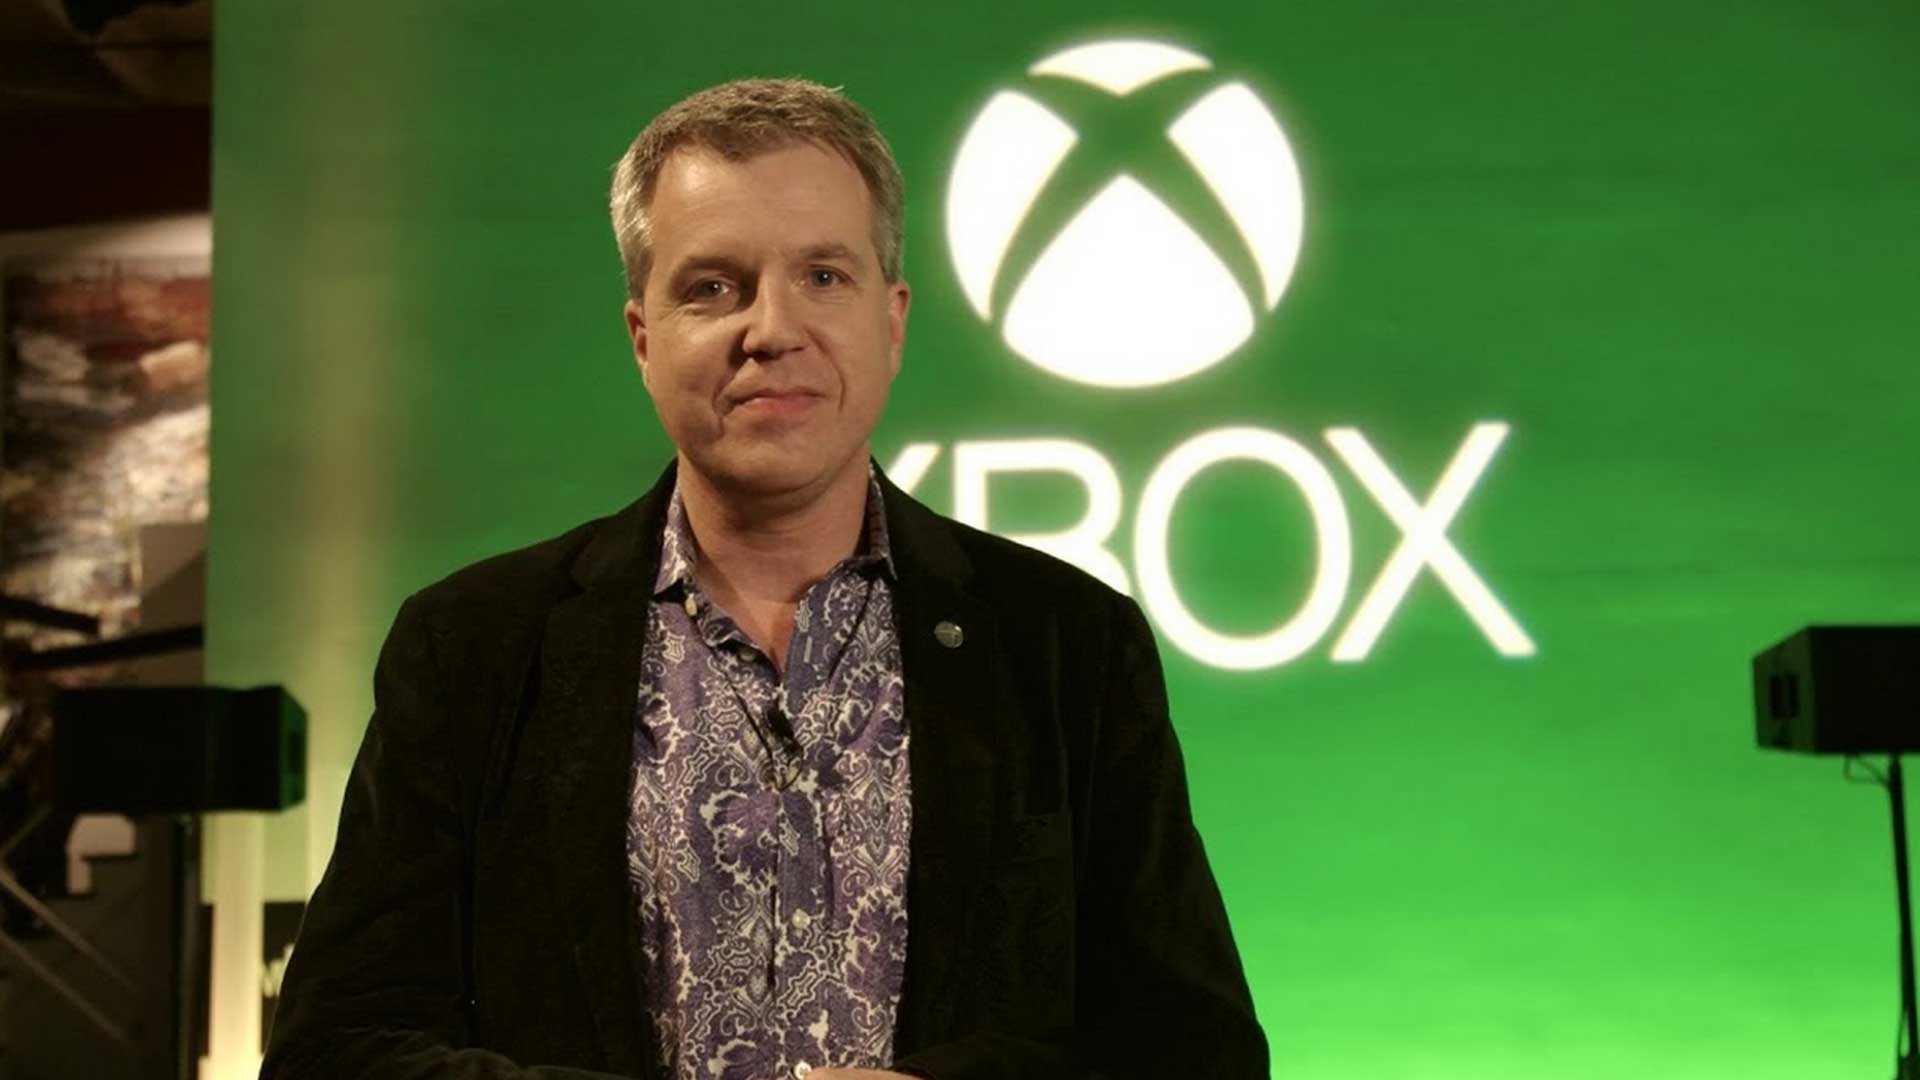 Major Nelson decides to leave Xbox after 20 years